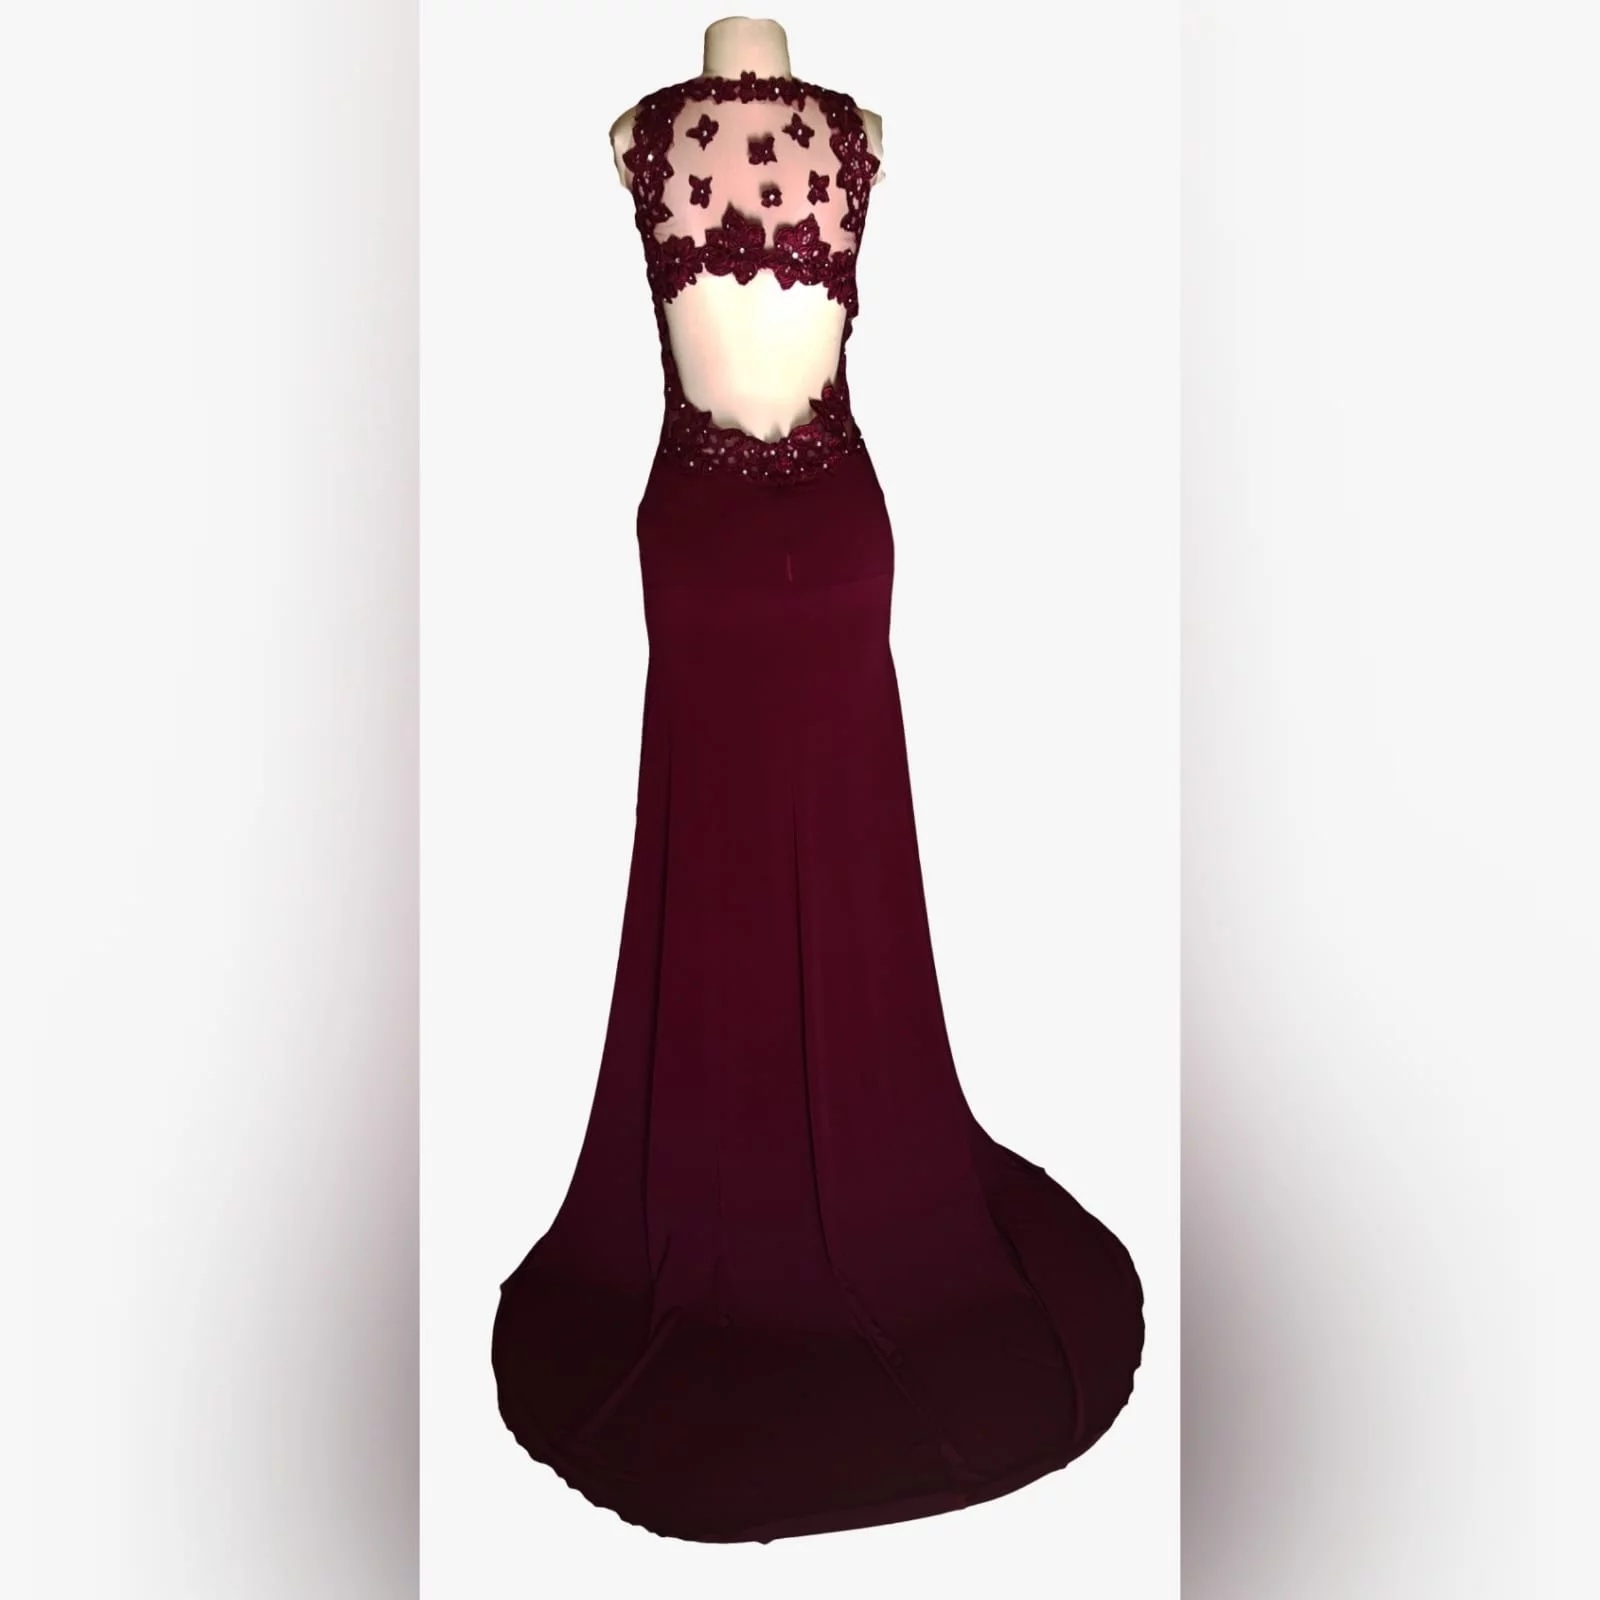 Burgundy long sexy prom dress 6 burgundy long sexy prom dress with an illusion lace low back and side tummy. Sweetheart neckline detailed with lace. With a slit and a train.